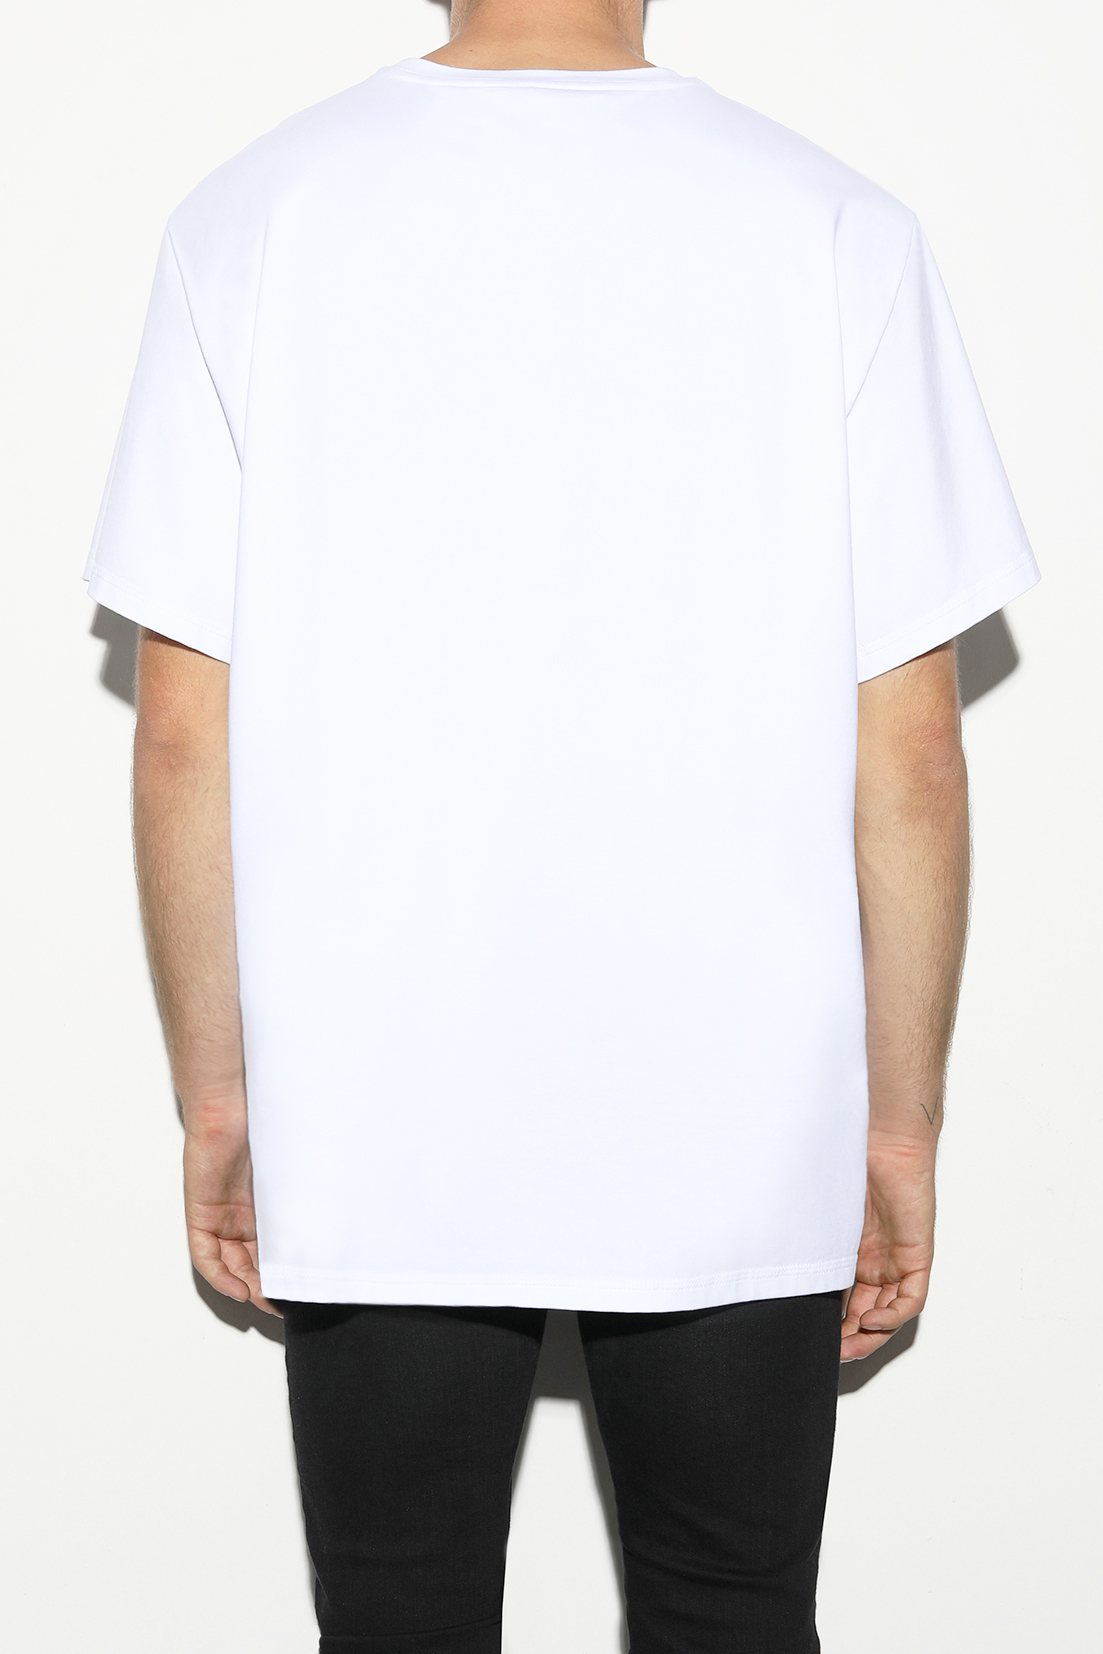 White t-shirt for men and women by designer Stefan Eckert, made of organic cotton, sustainably produced in Germany